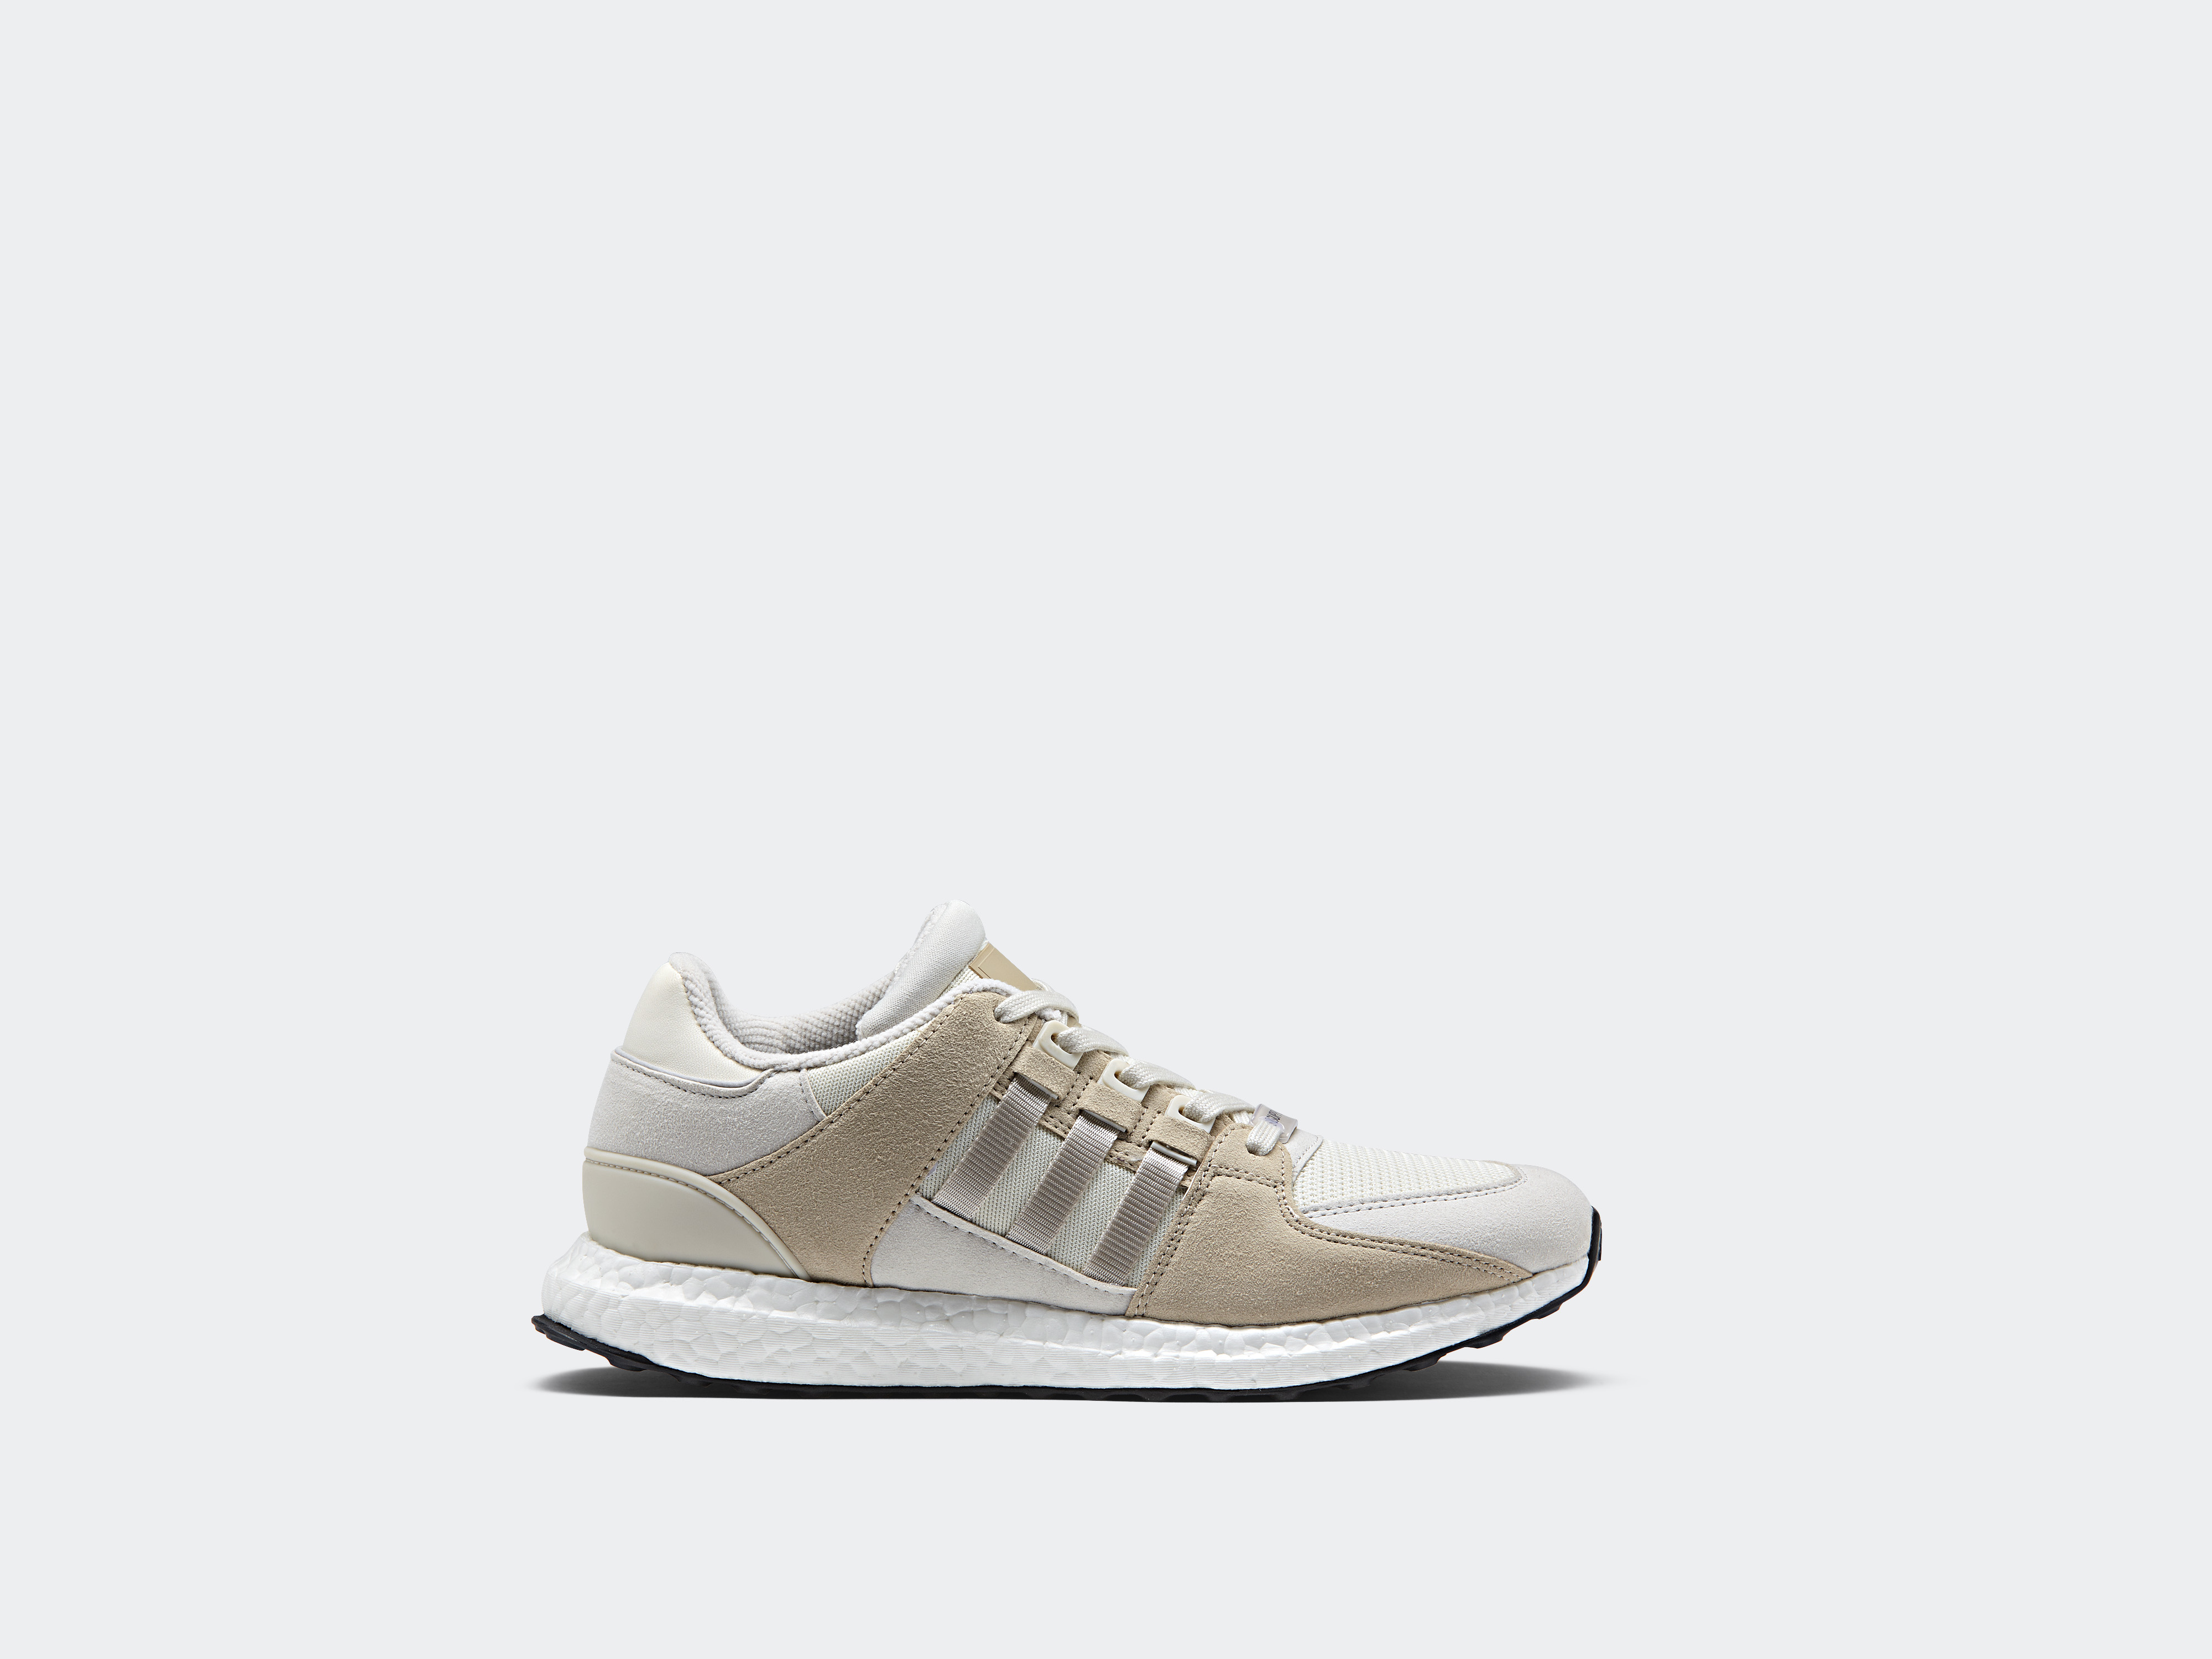 adidas EQT support ultra Muted Premium Pack 1